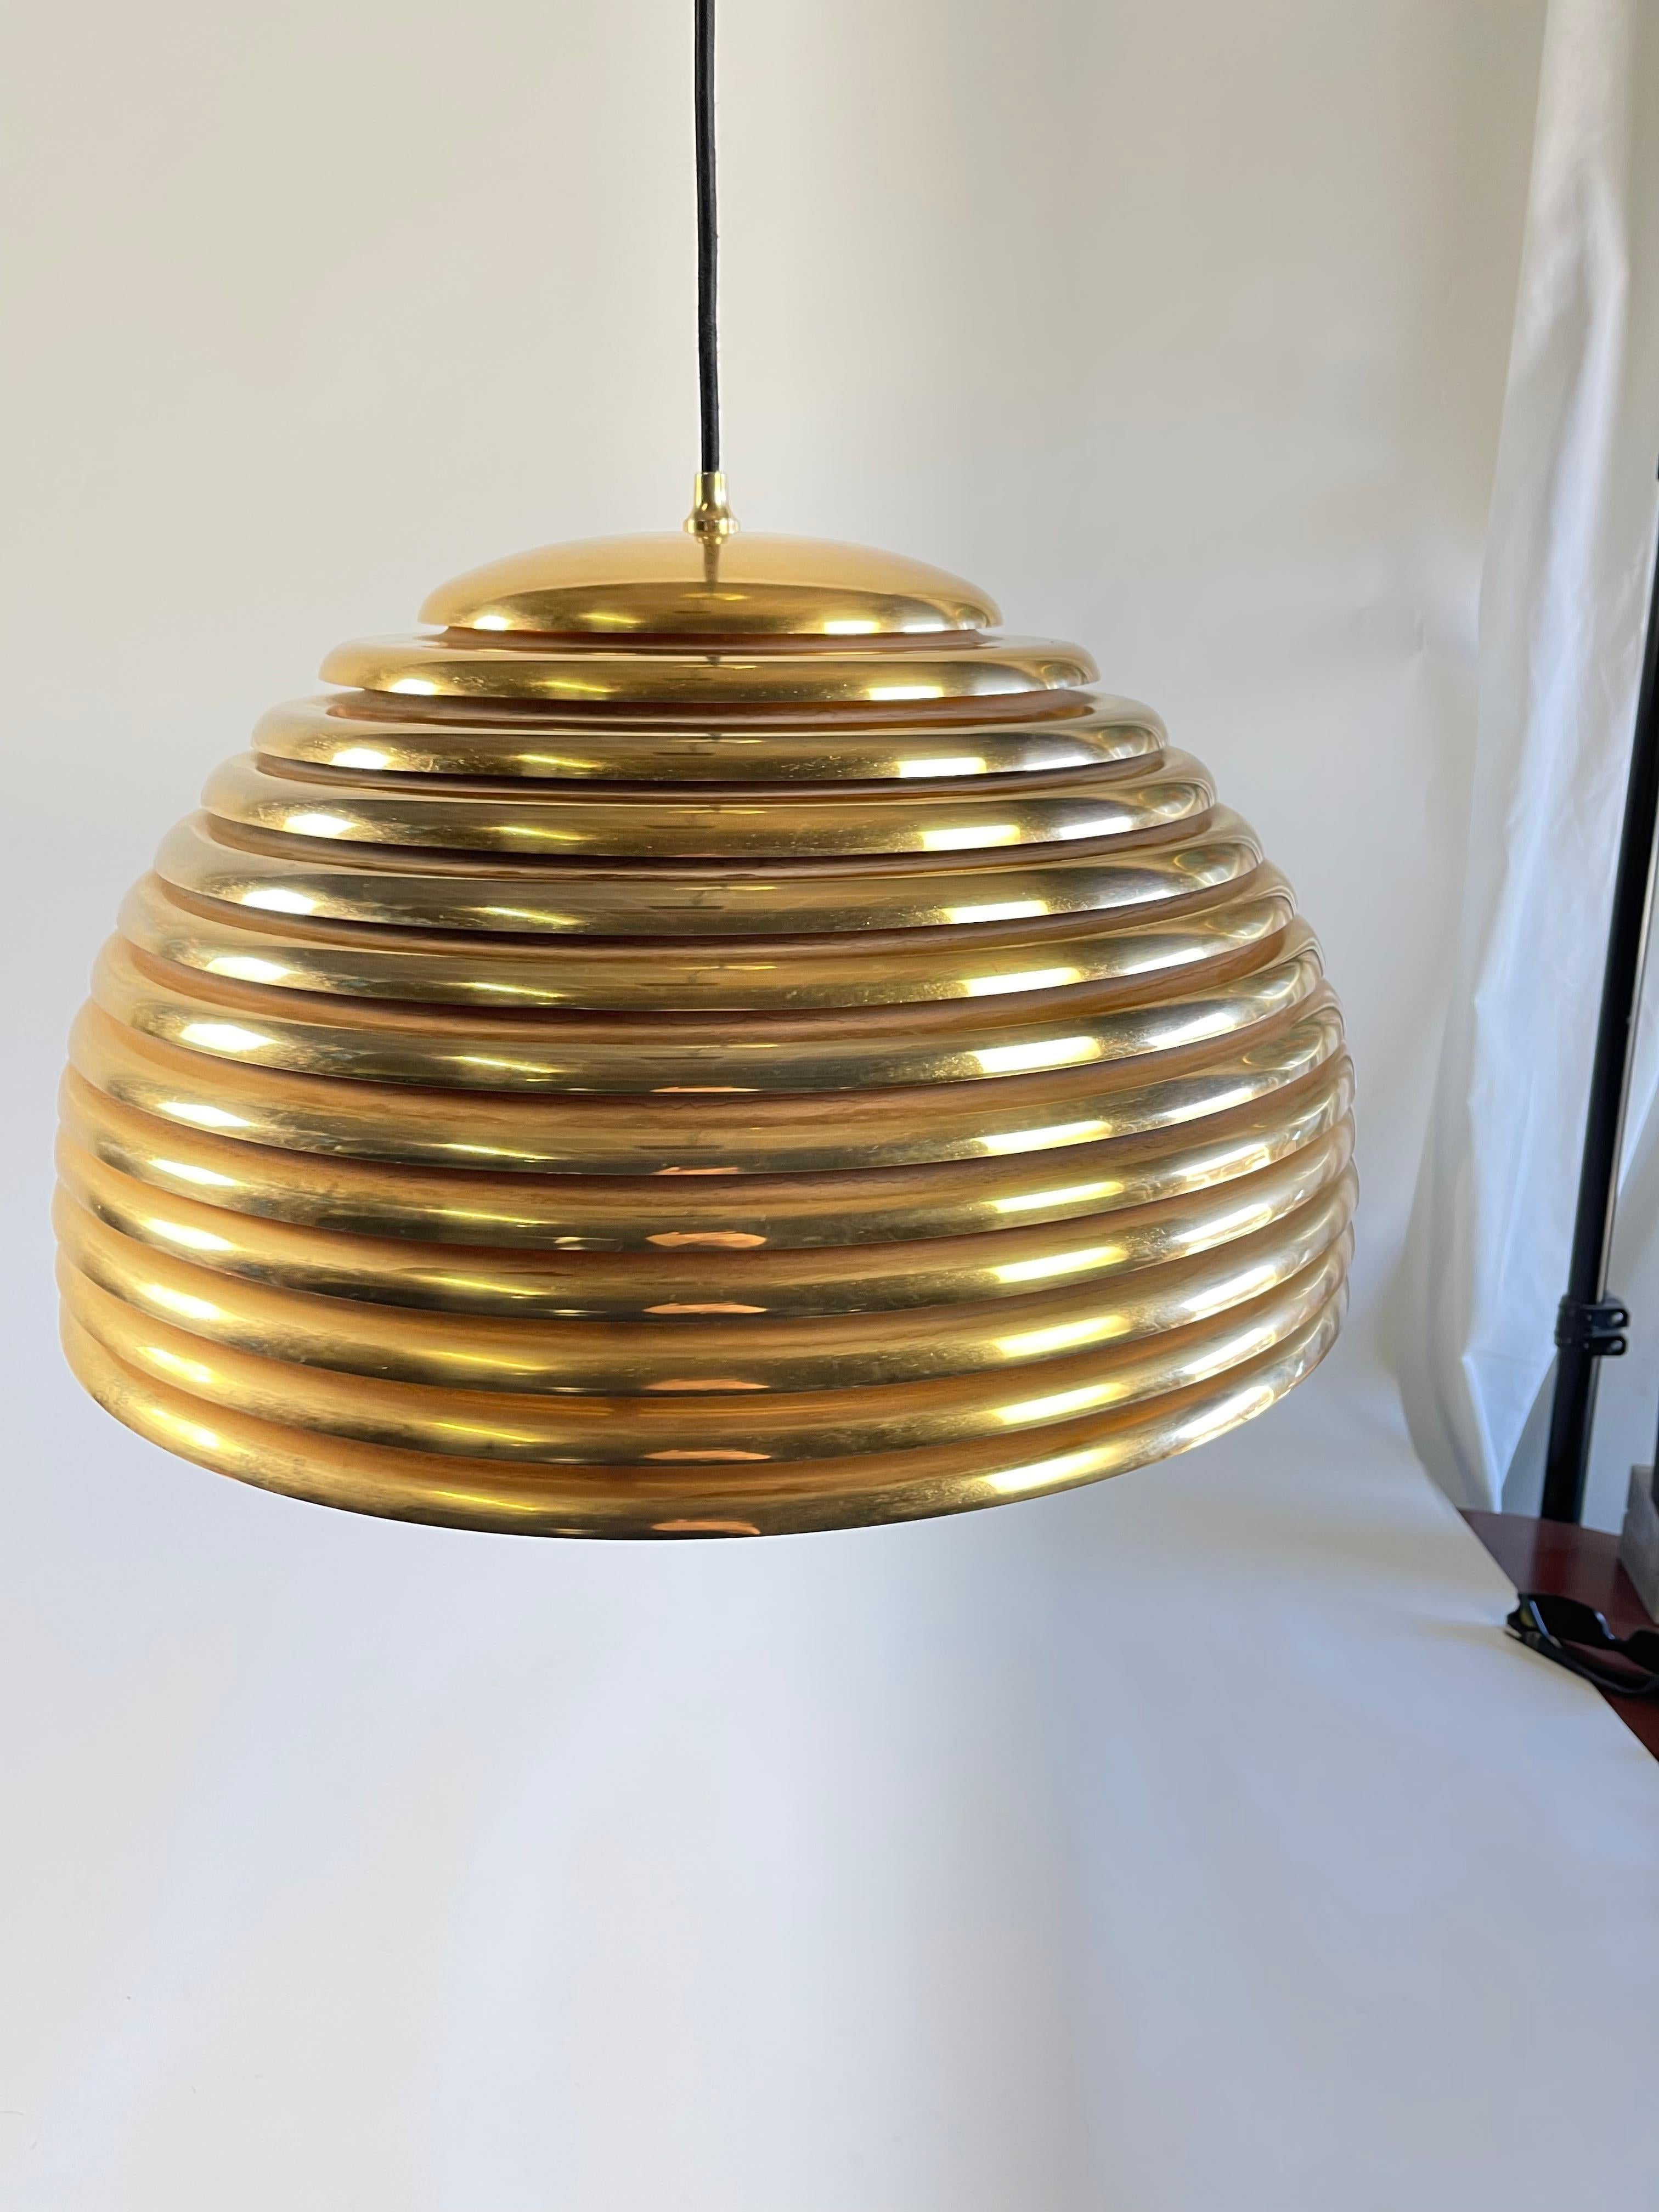 German Rare Large Brass / Golden Saturno Pendant Lamp by Kazuo Motozawa for Staff For Sale